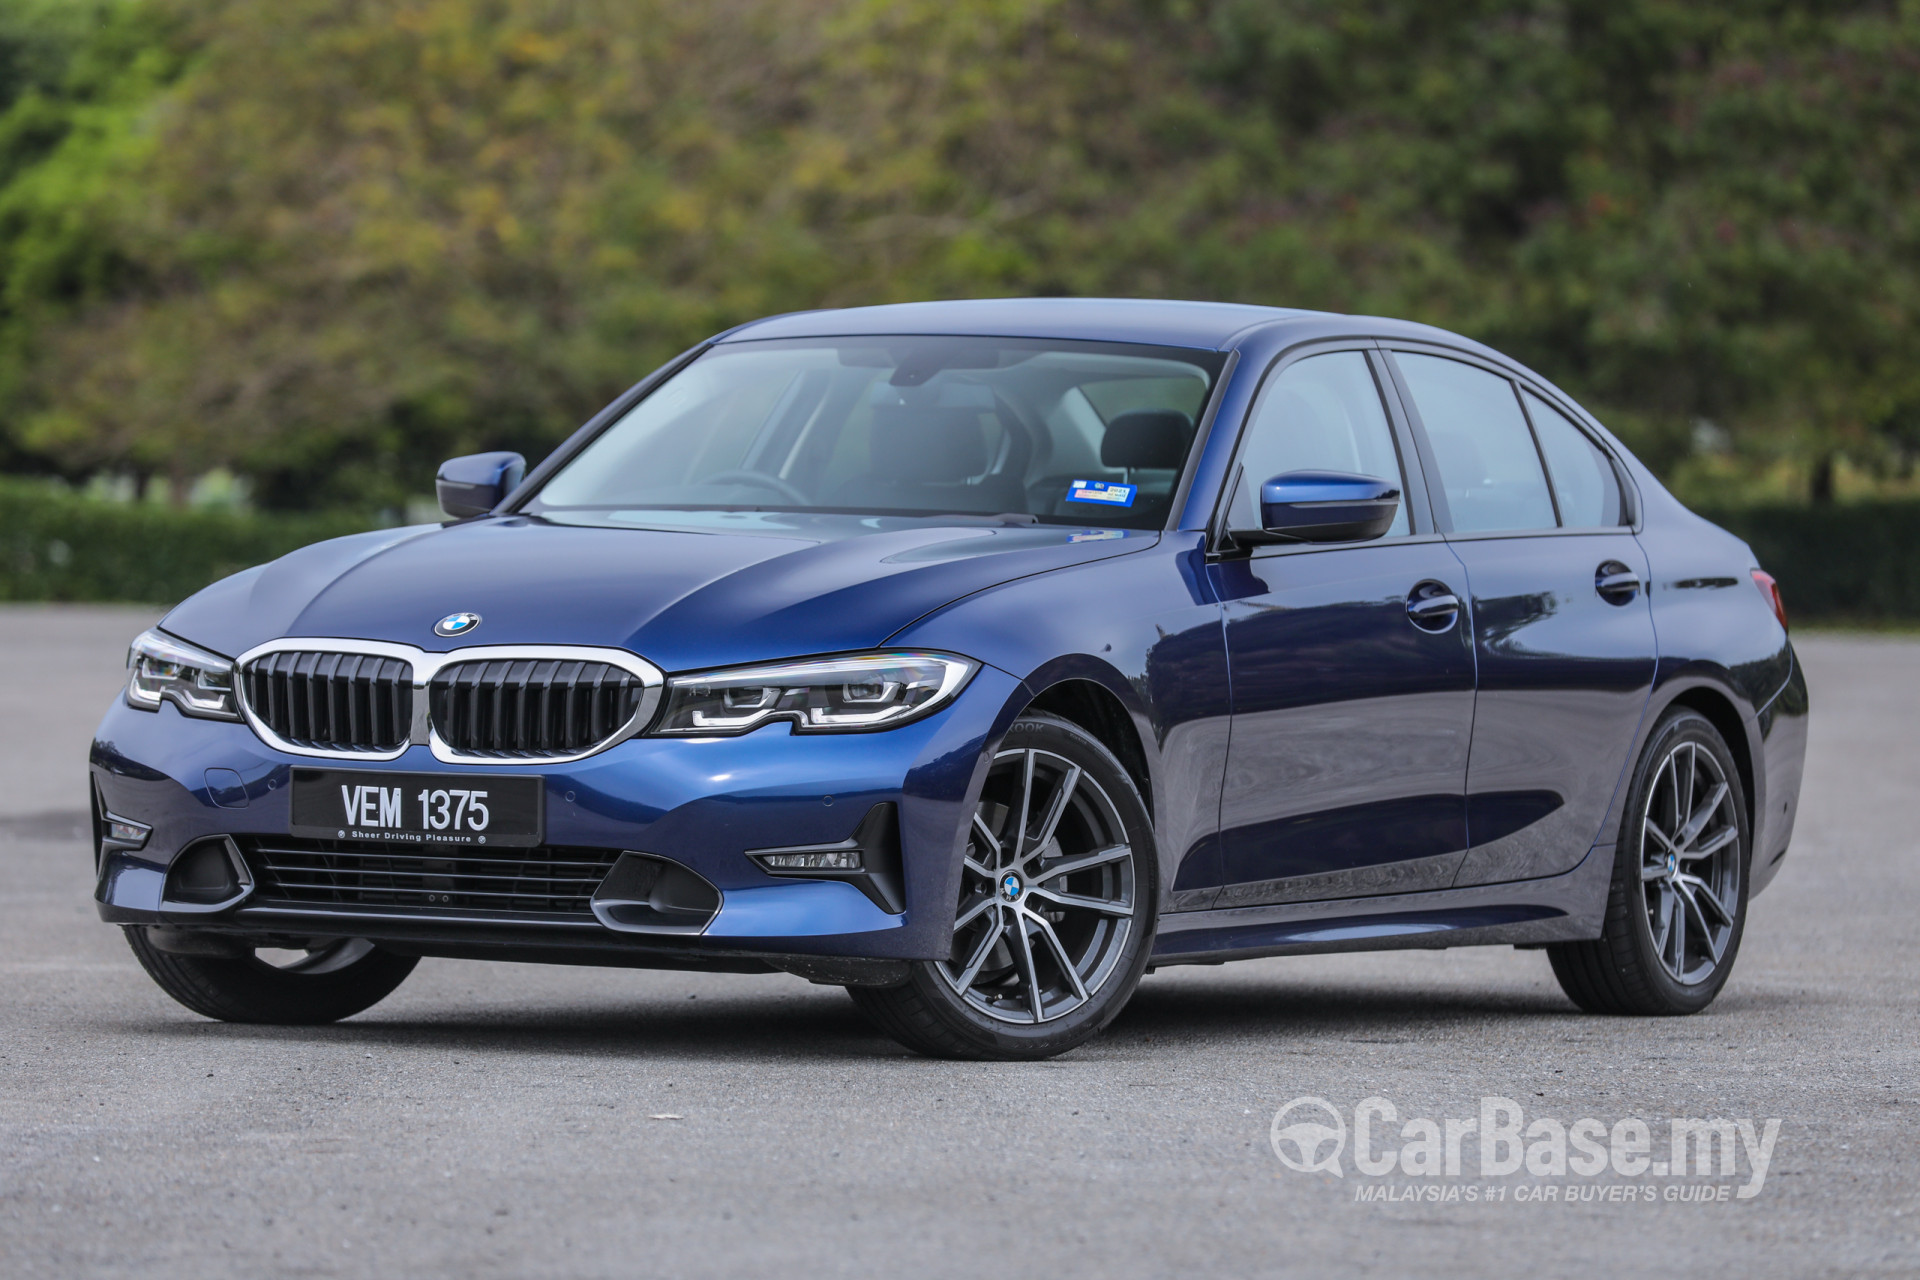 BMW 3 Series G20 (2019) Exterior Image #68597 in Malaysia ...